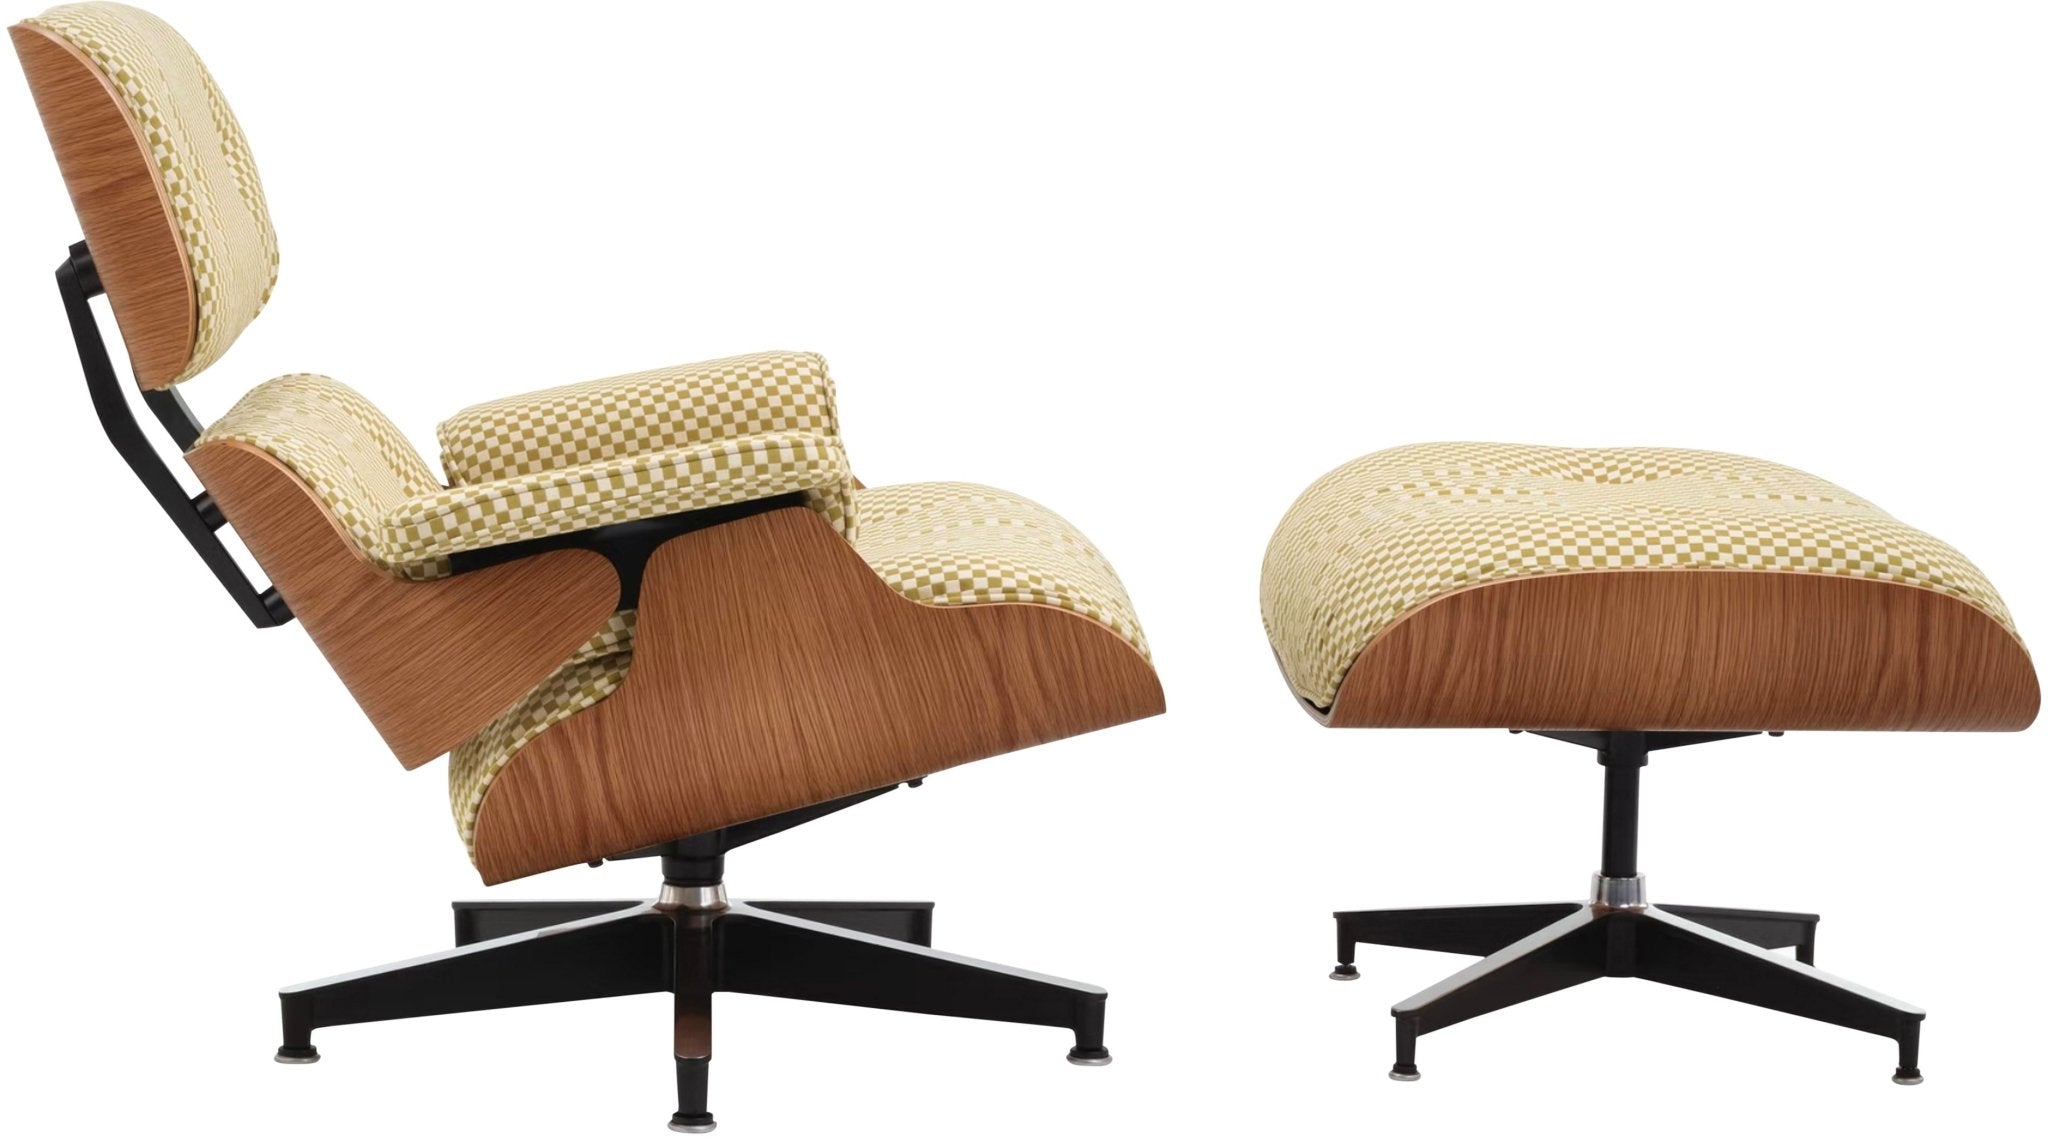 Eames® Lounge Chair and Ottoman - Alexander Girard Check - Classic / Oiled Walnut / Emerald Light/Ivory Checker